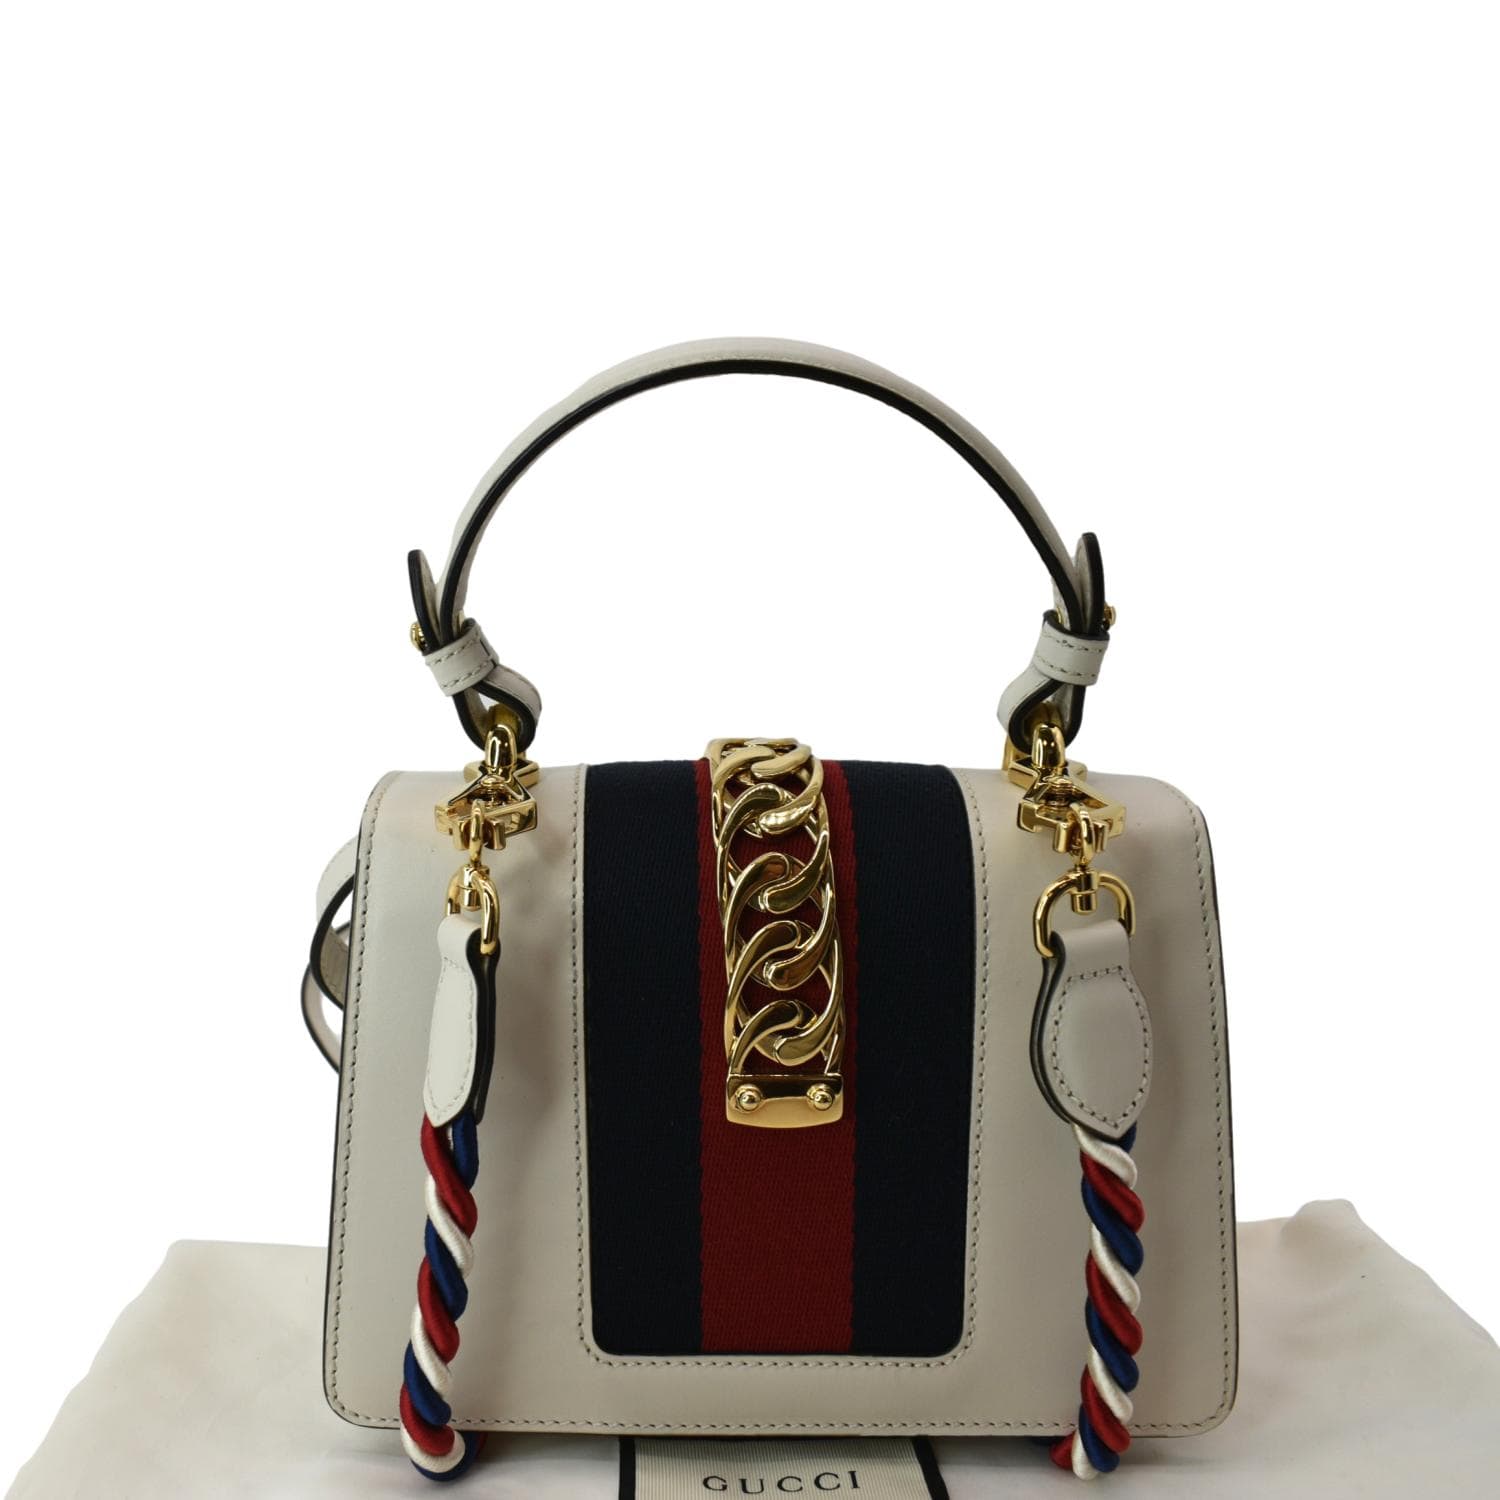 Gucci Bag Photos, Download The BEST Free Gucci Bag Stock Photos & HD Images